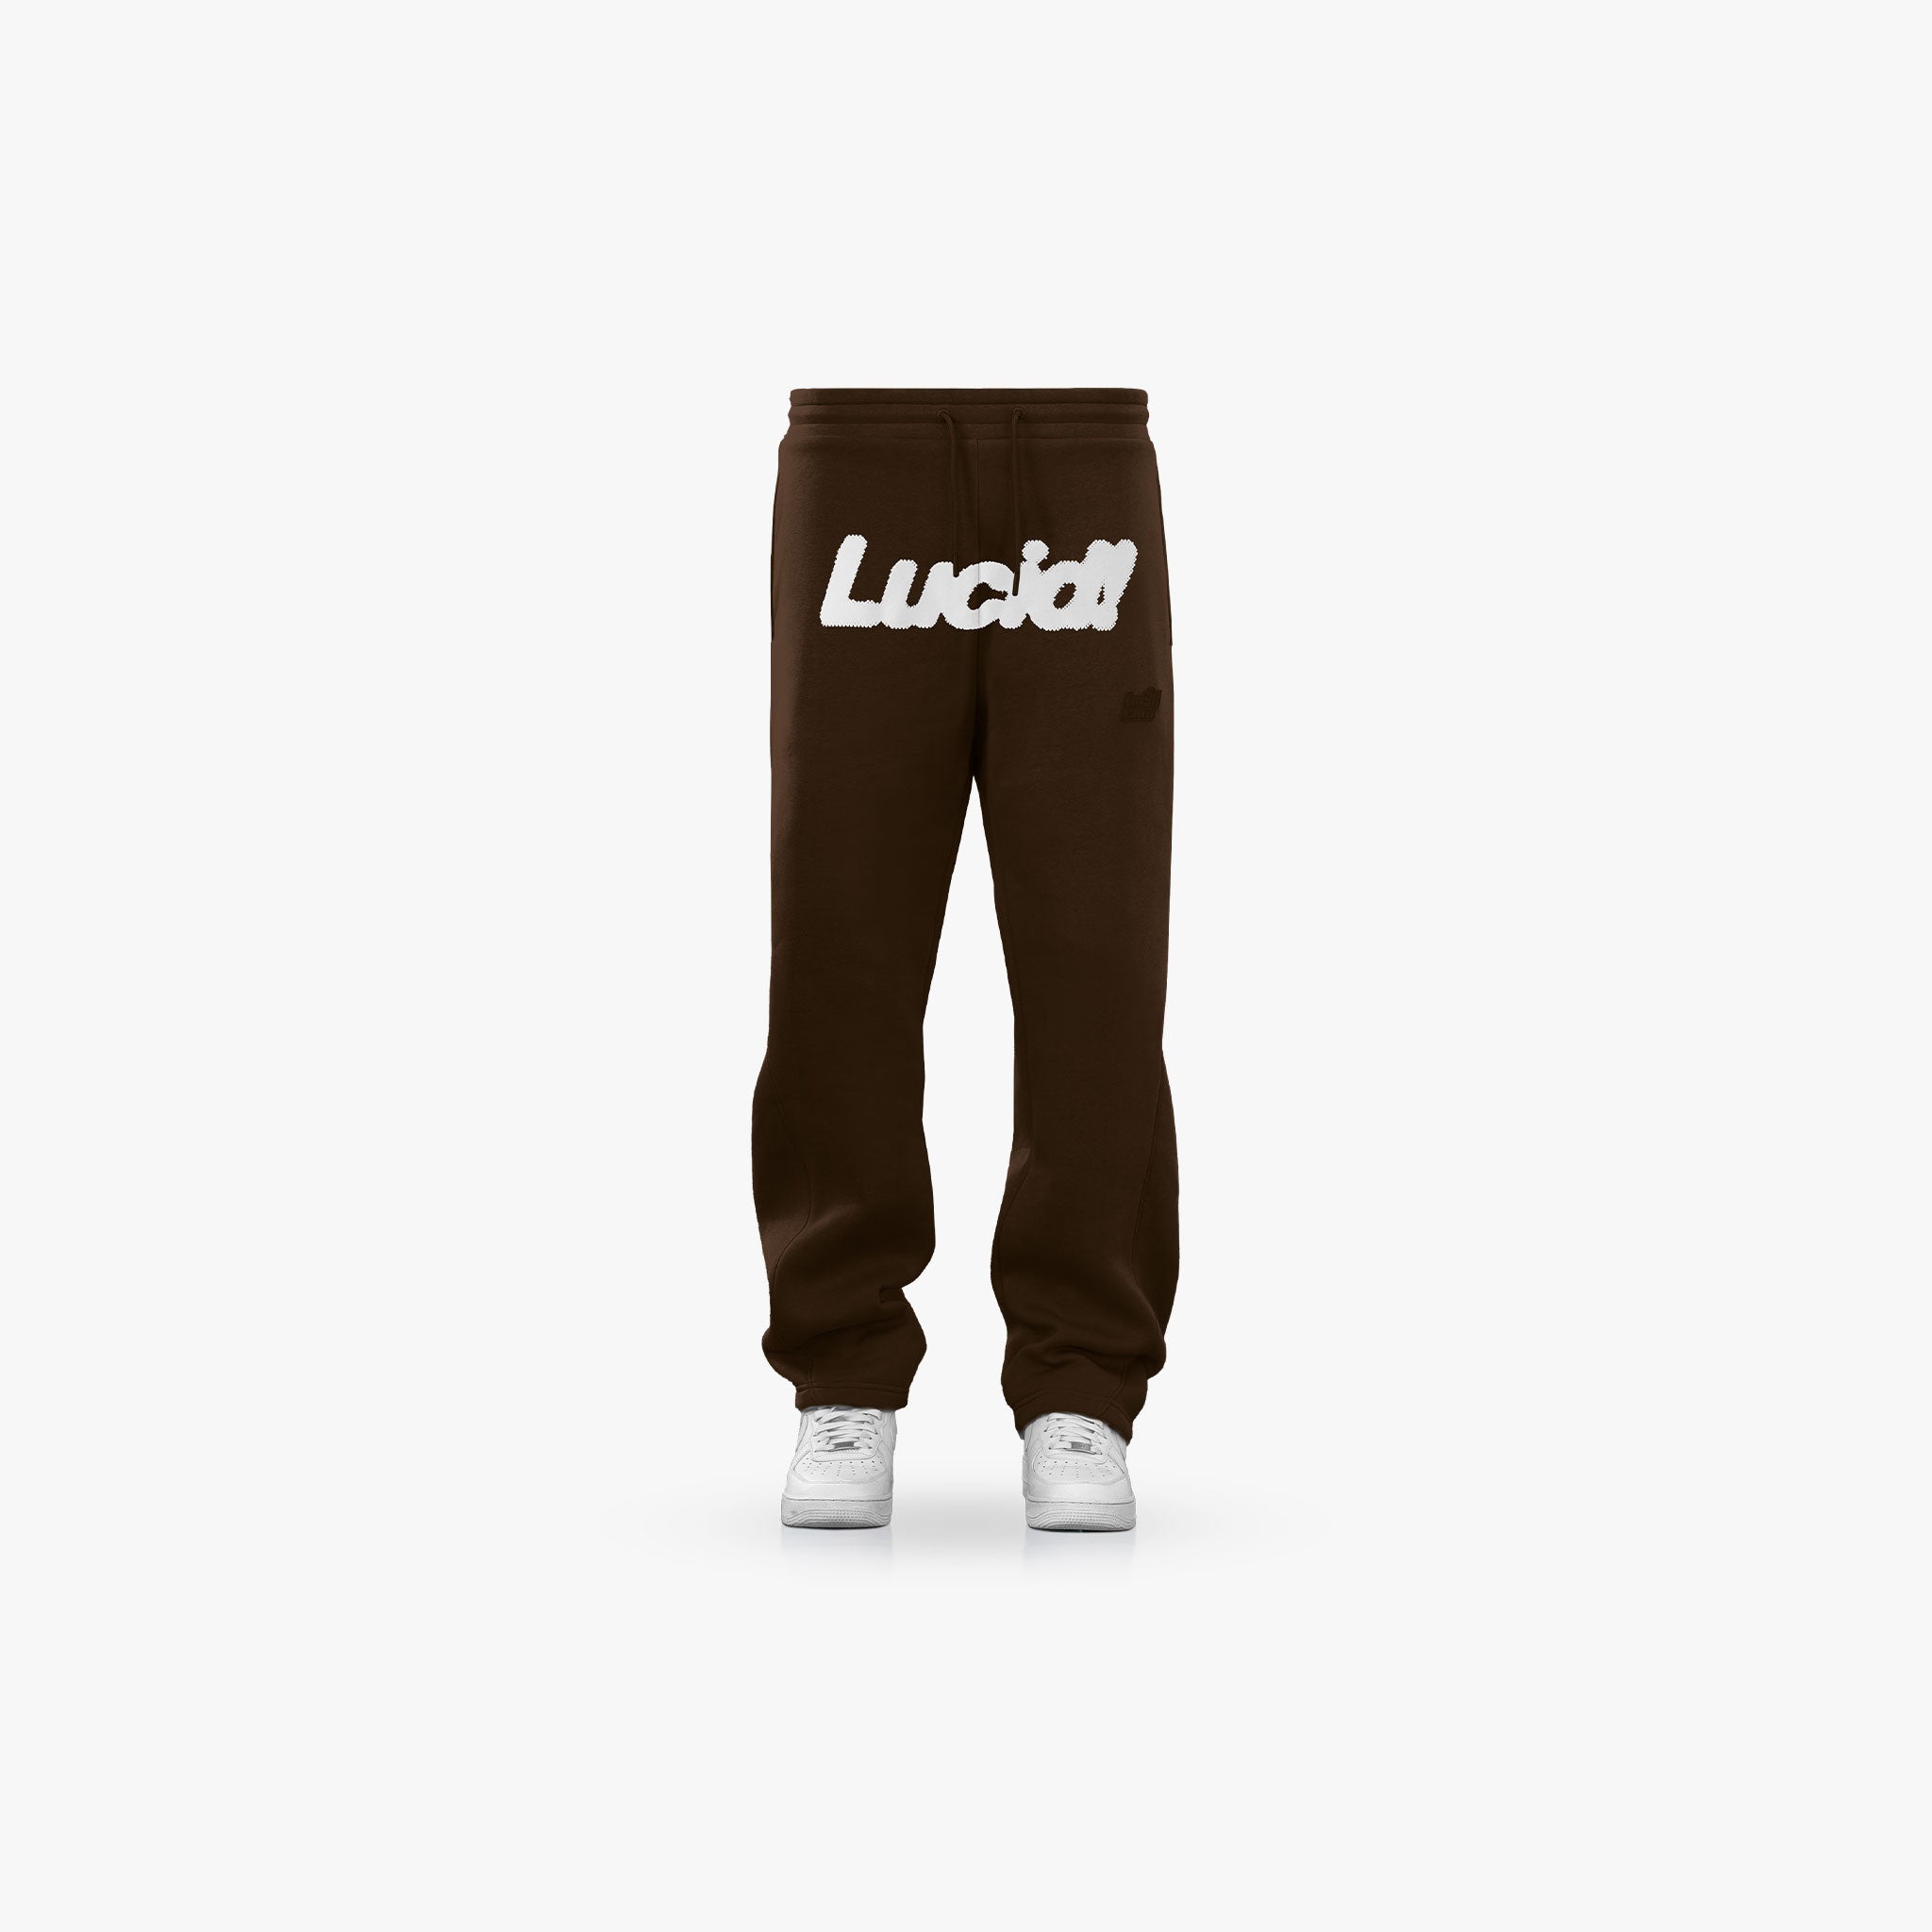 Lucid! Sweatpants Brown/White